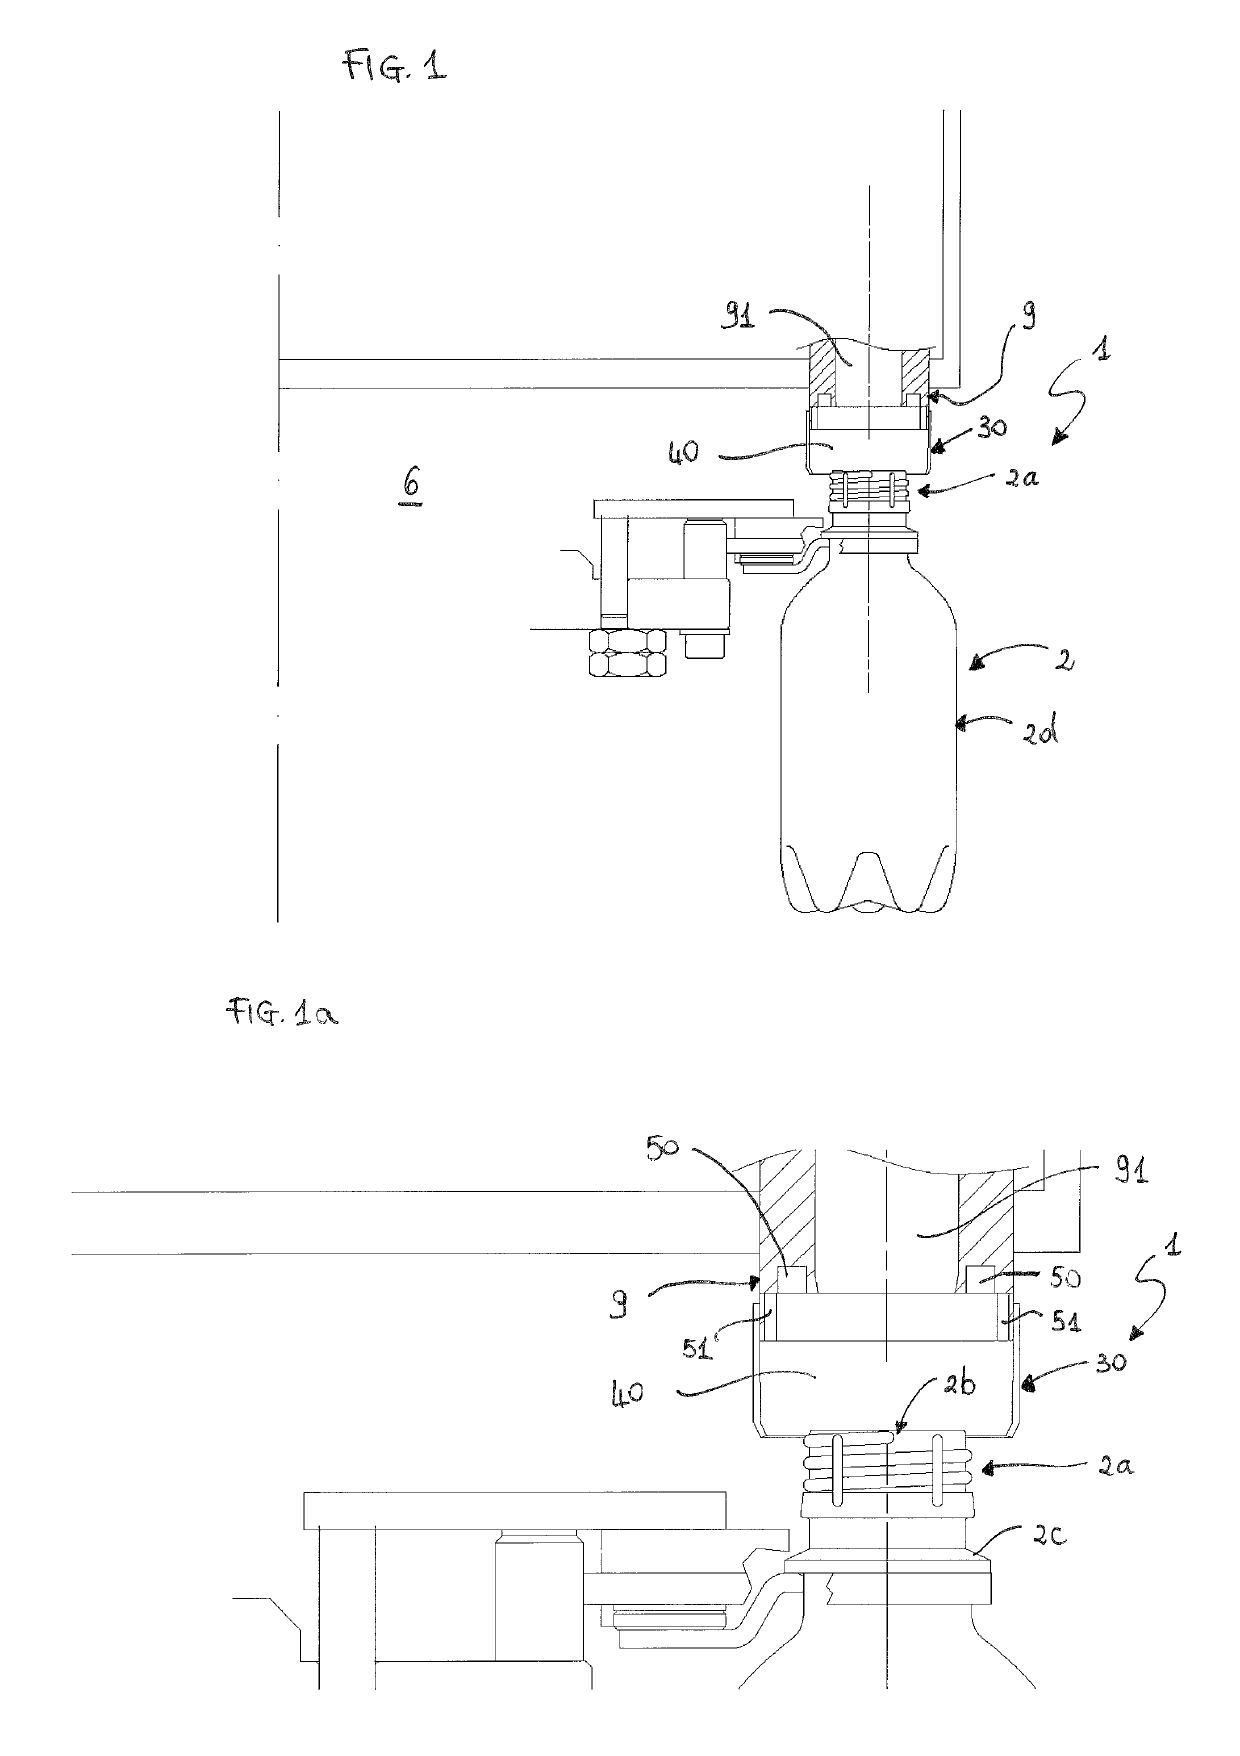 Apparatus and method for filling containers